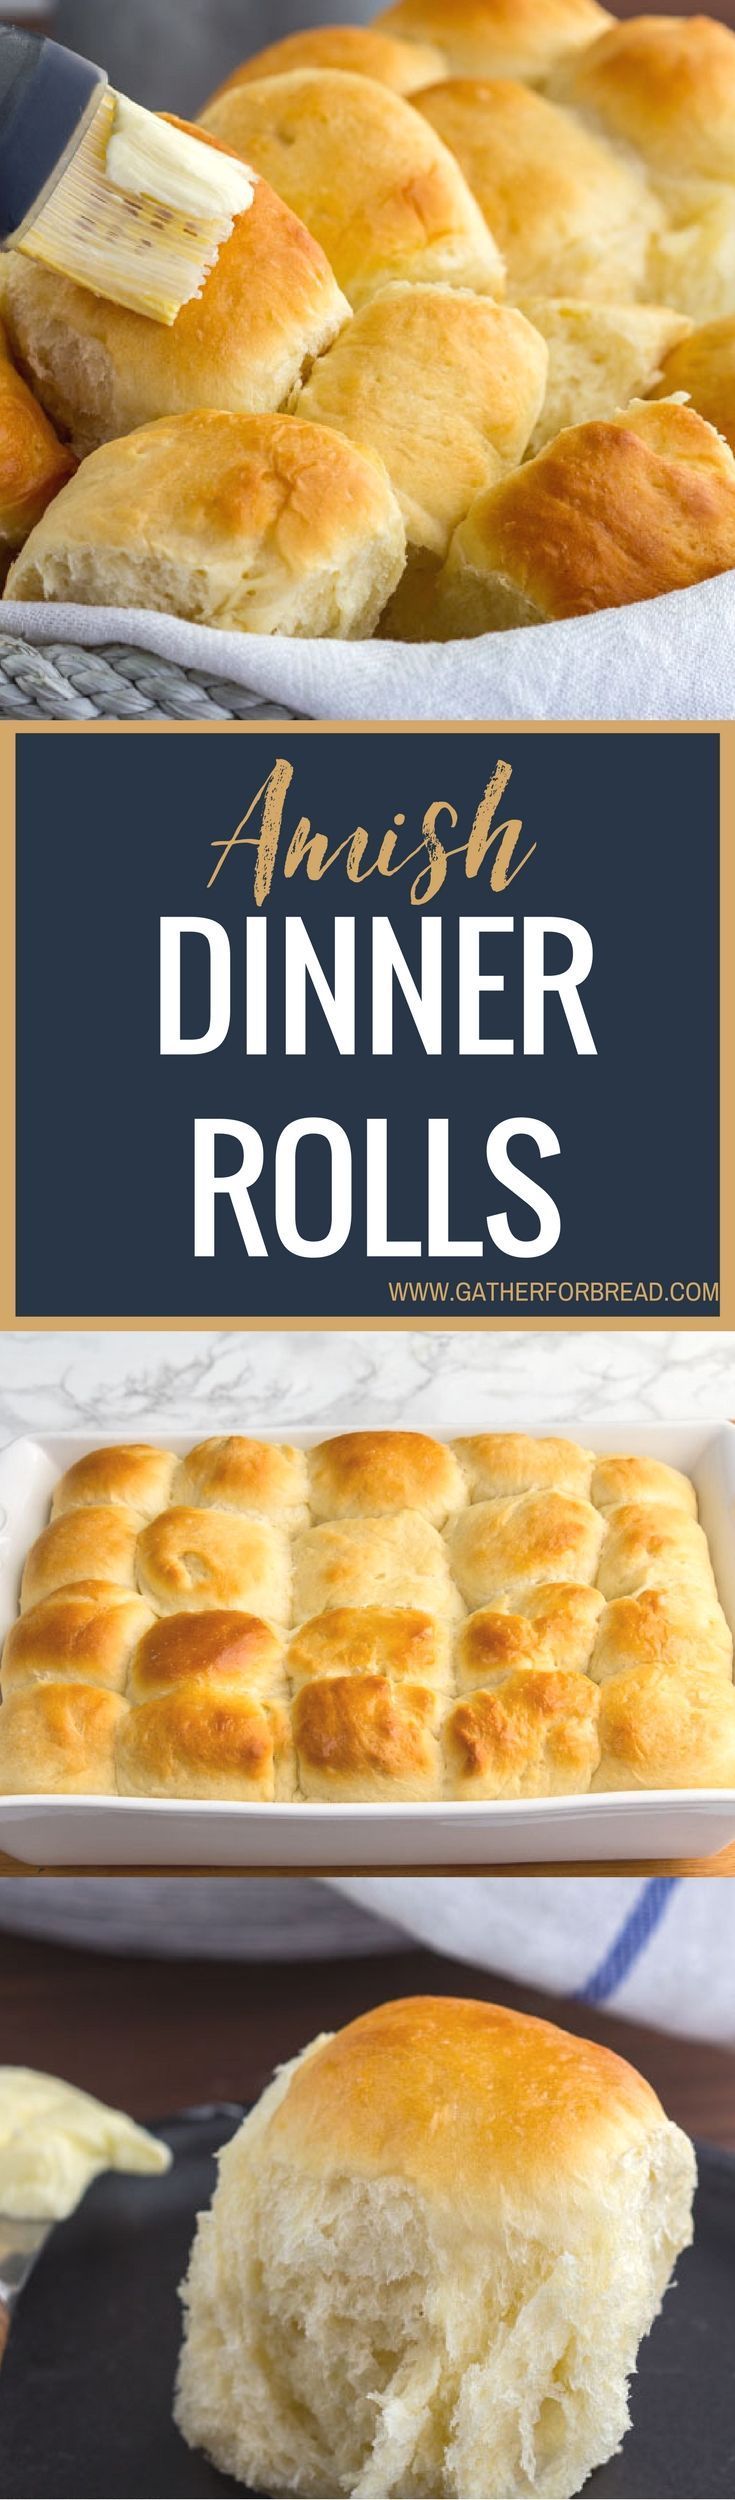 Amish Dinner Rolls – Soft Yeast rolls recipe for warm fluffy buns. Made with instant mashed potato flakes, best served with any